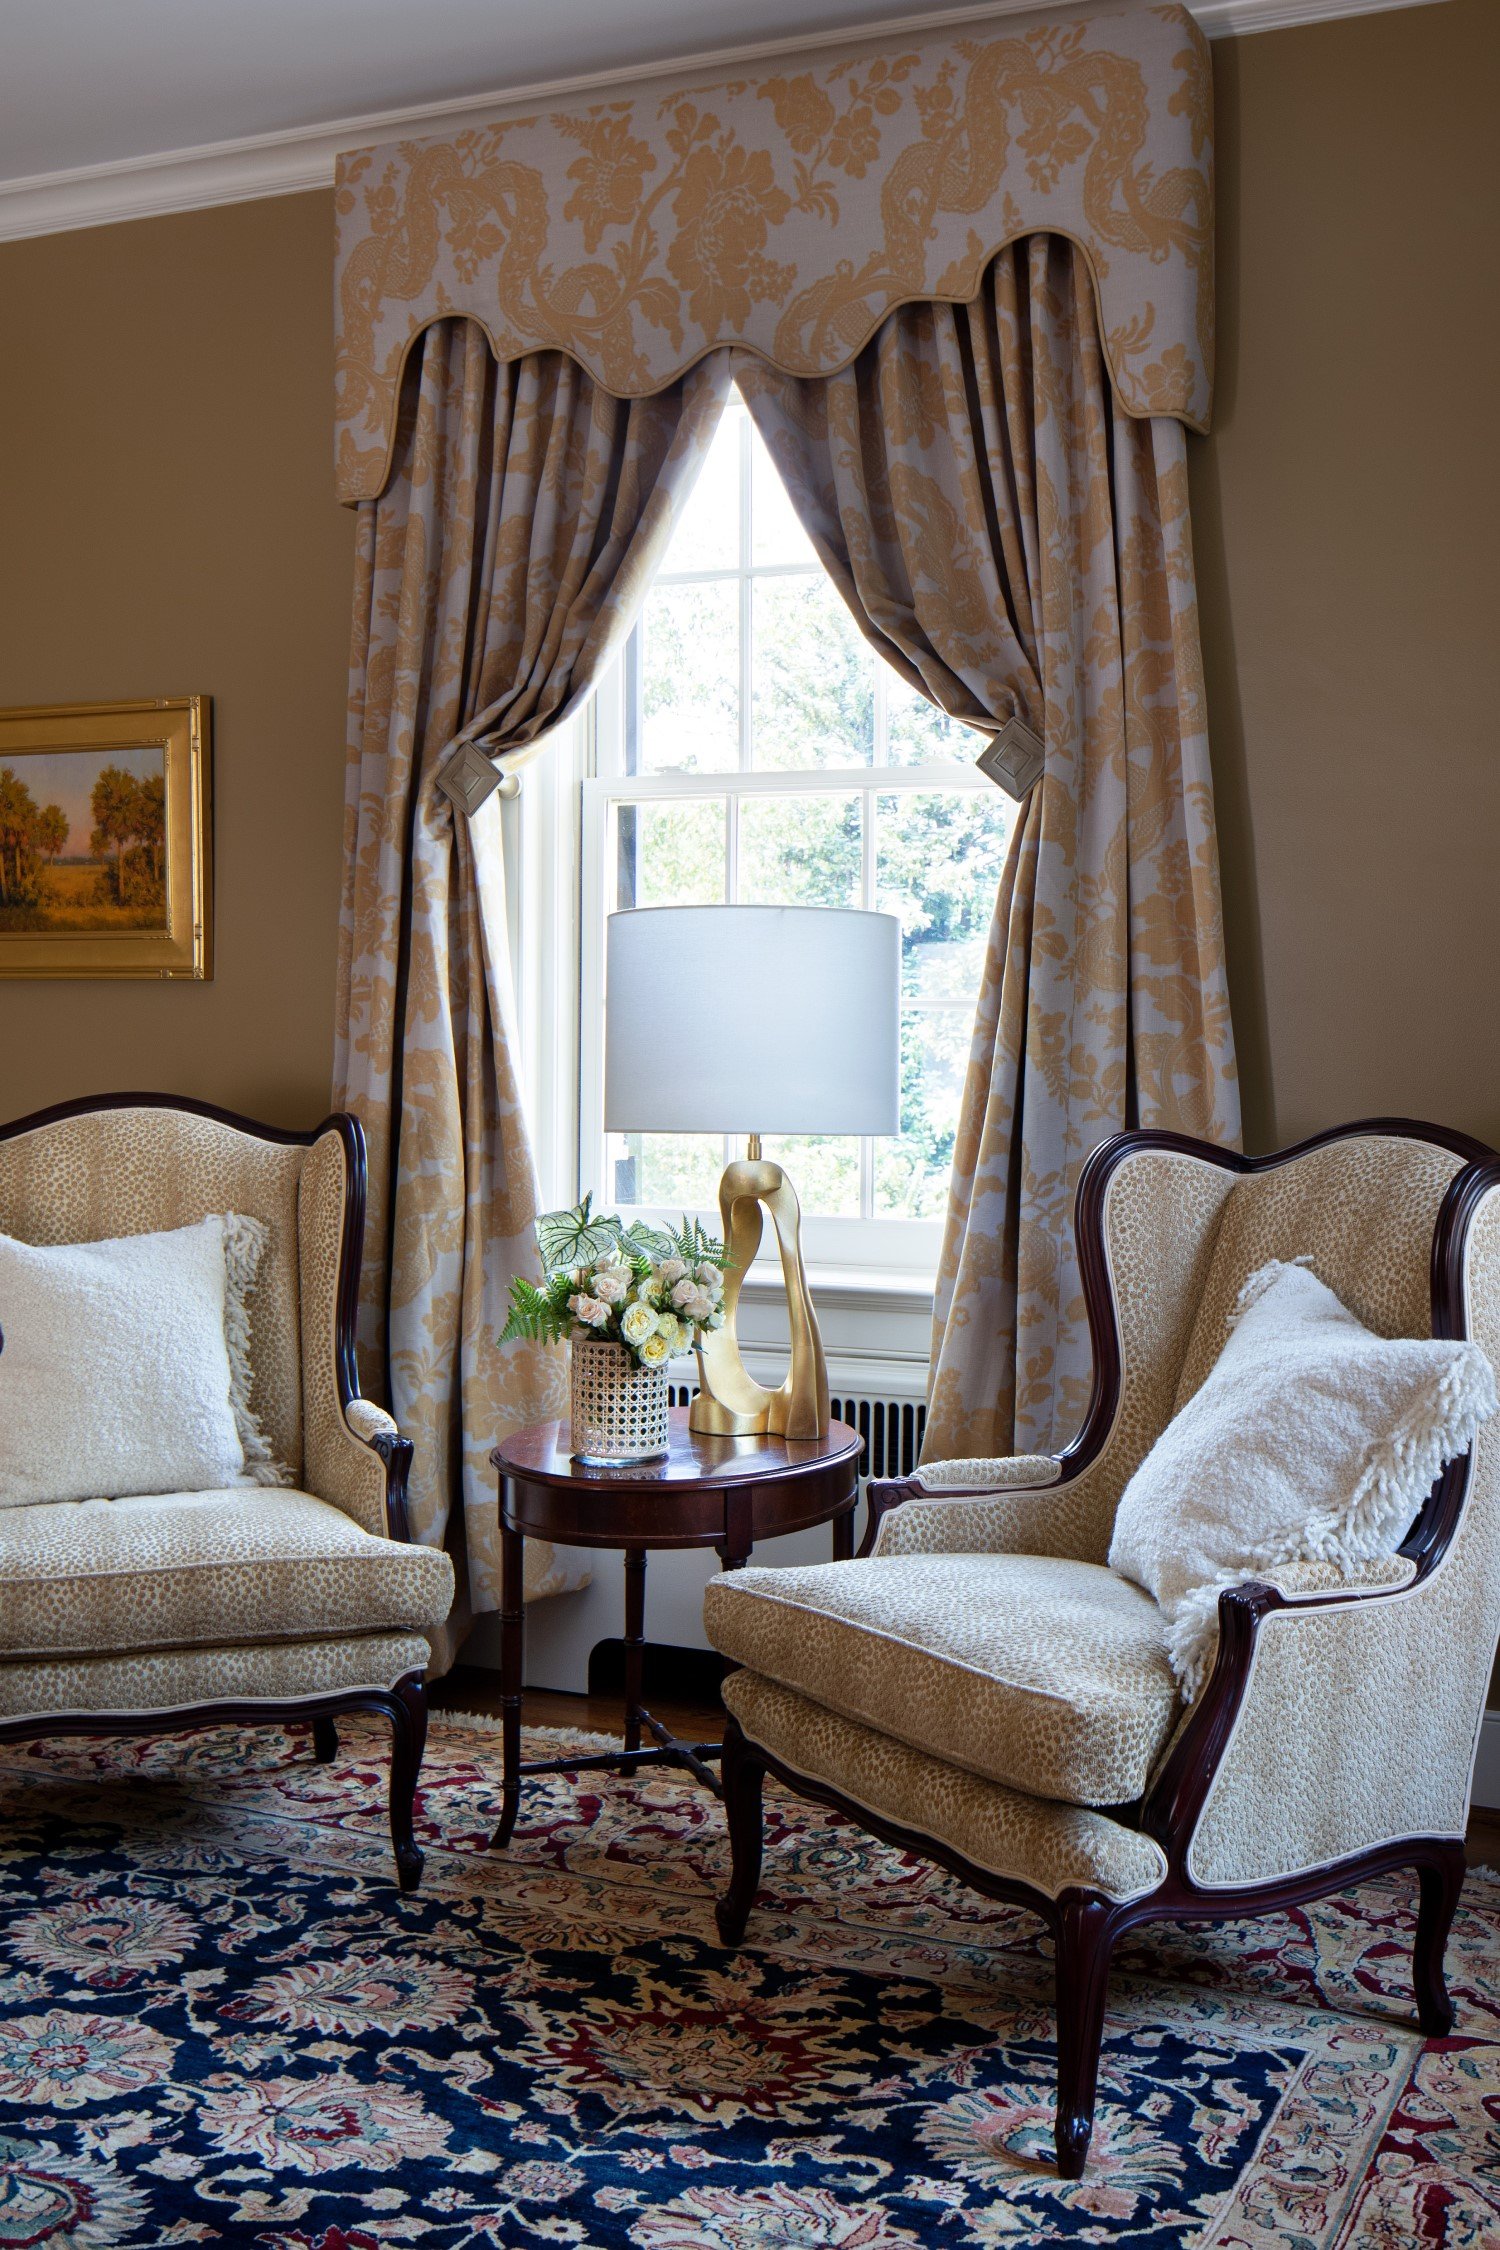  Traditional wing-back chairs, a Turkish rug, and a fluted valance covered in a floral damask that matches the drapes 